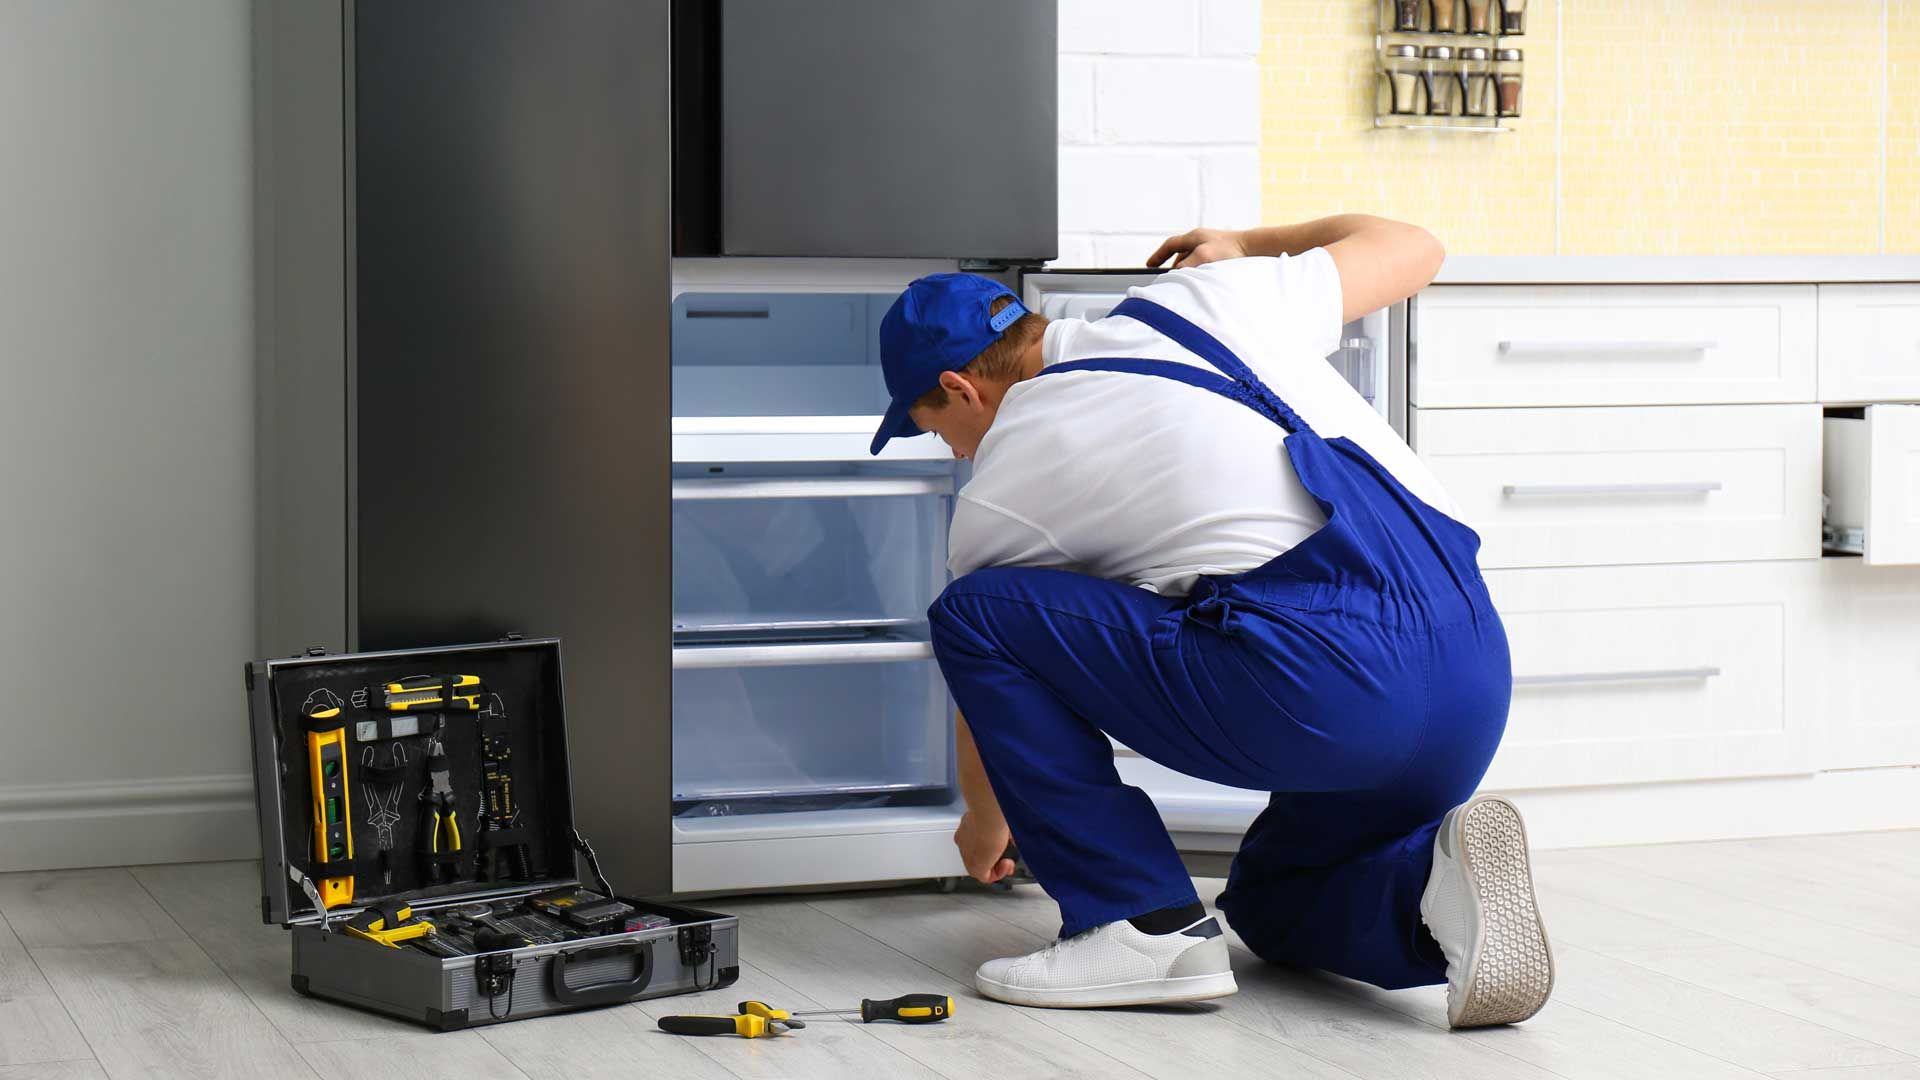 Mastering Refrigerator Repair: Solutions for a Cool Fridge